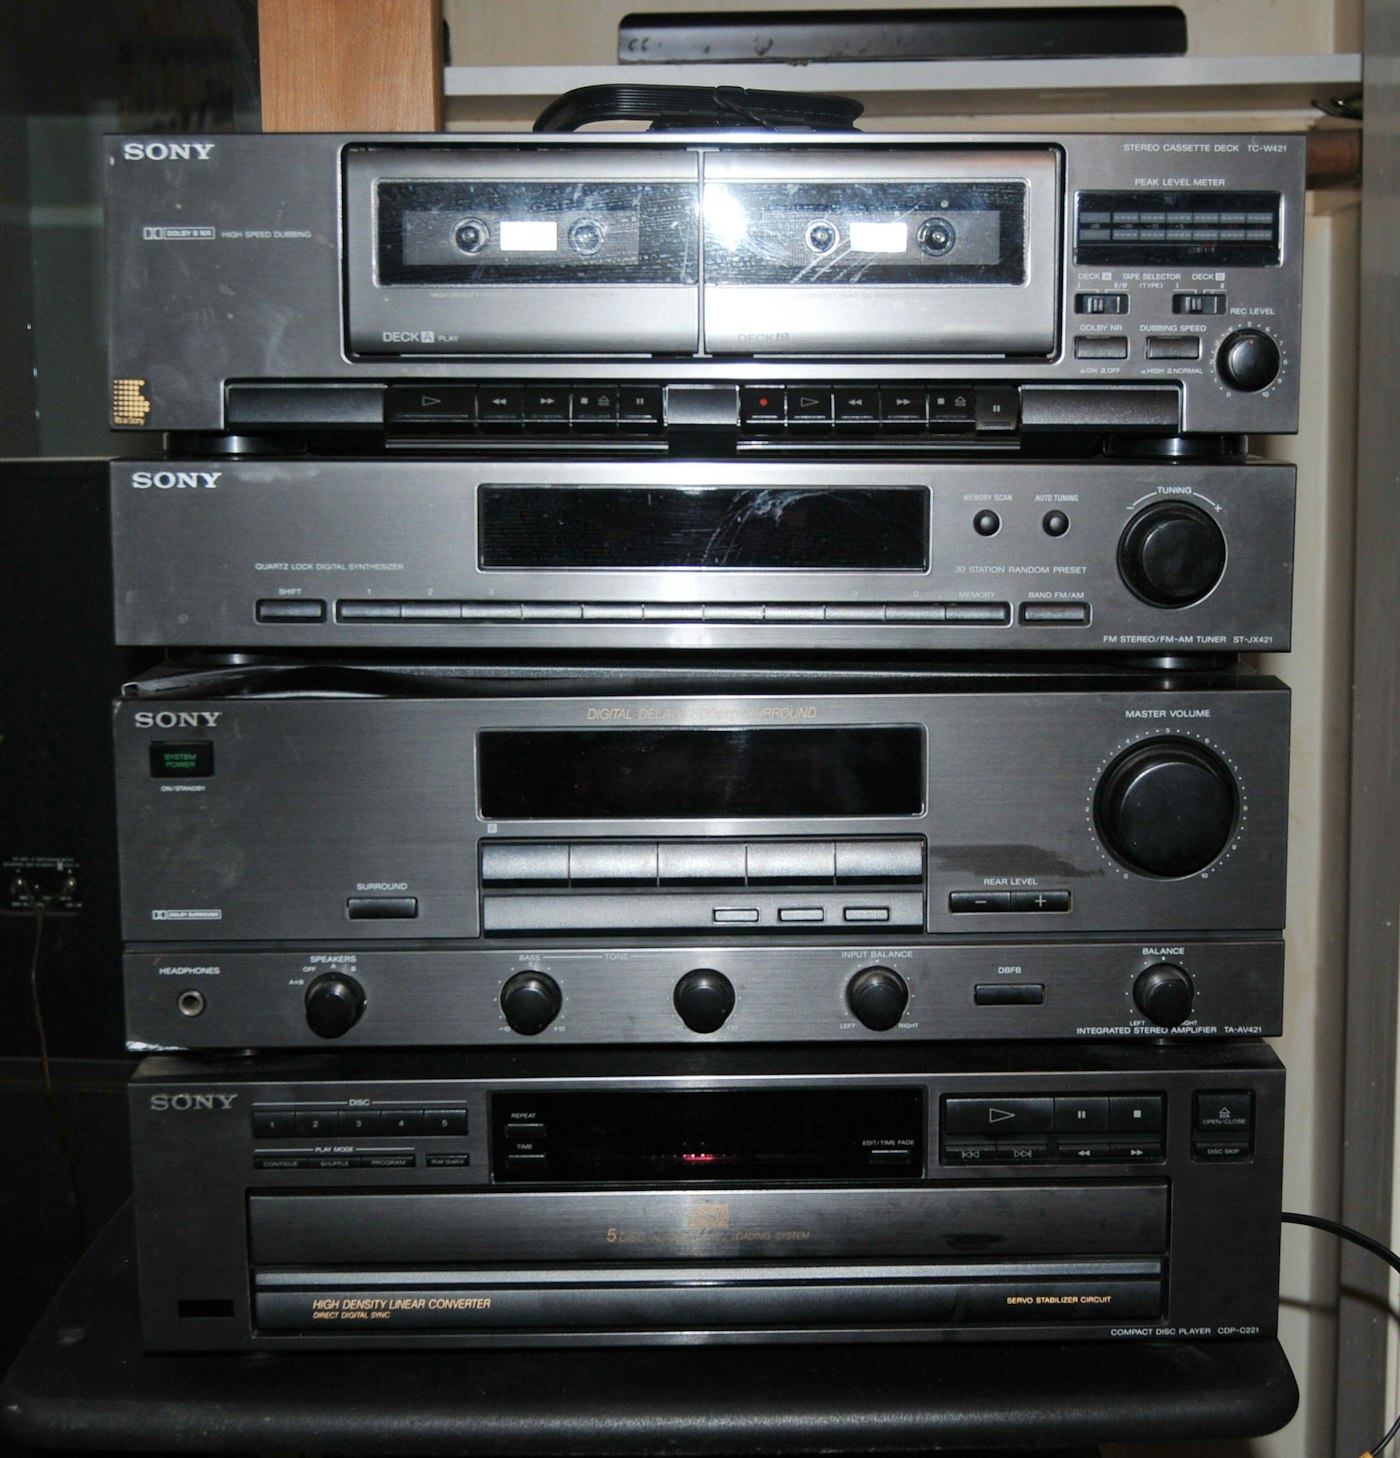 Sony Component Stereo System Includes CD Player, Turntable, Speakers